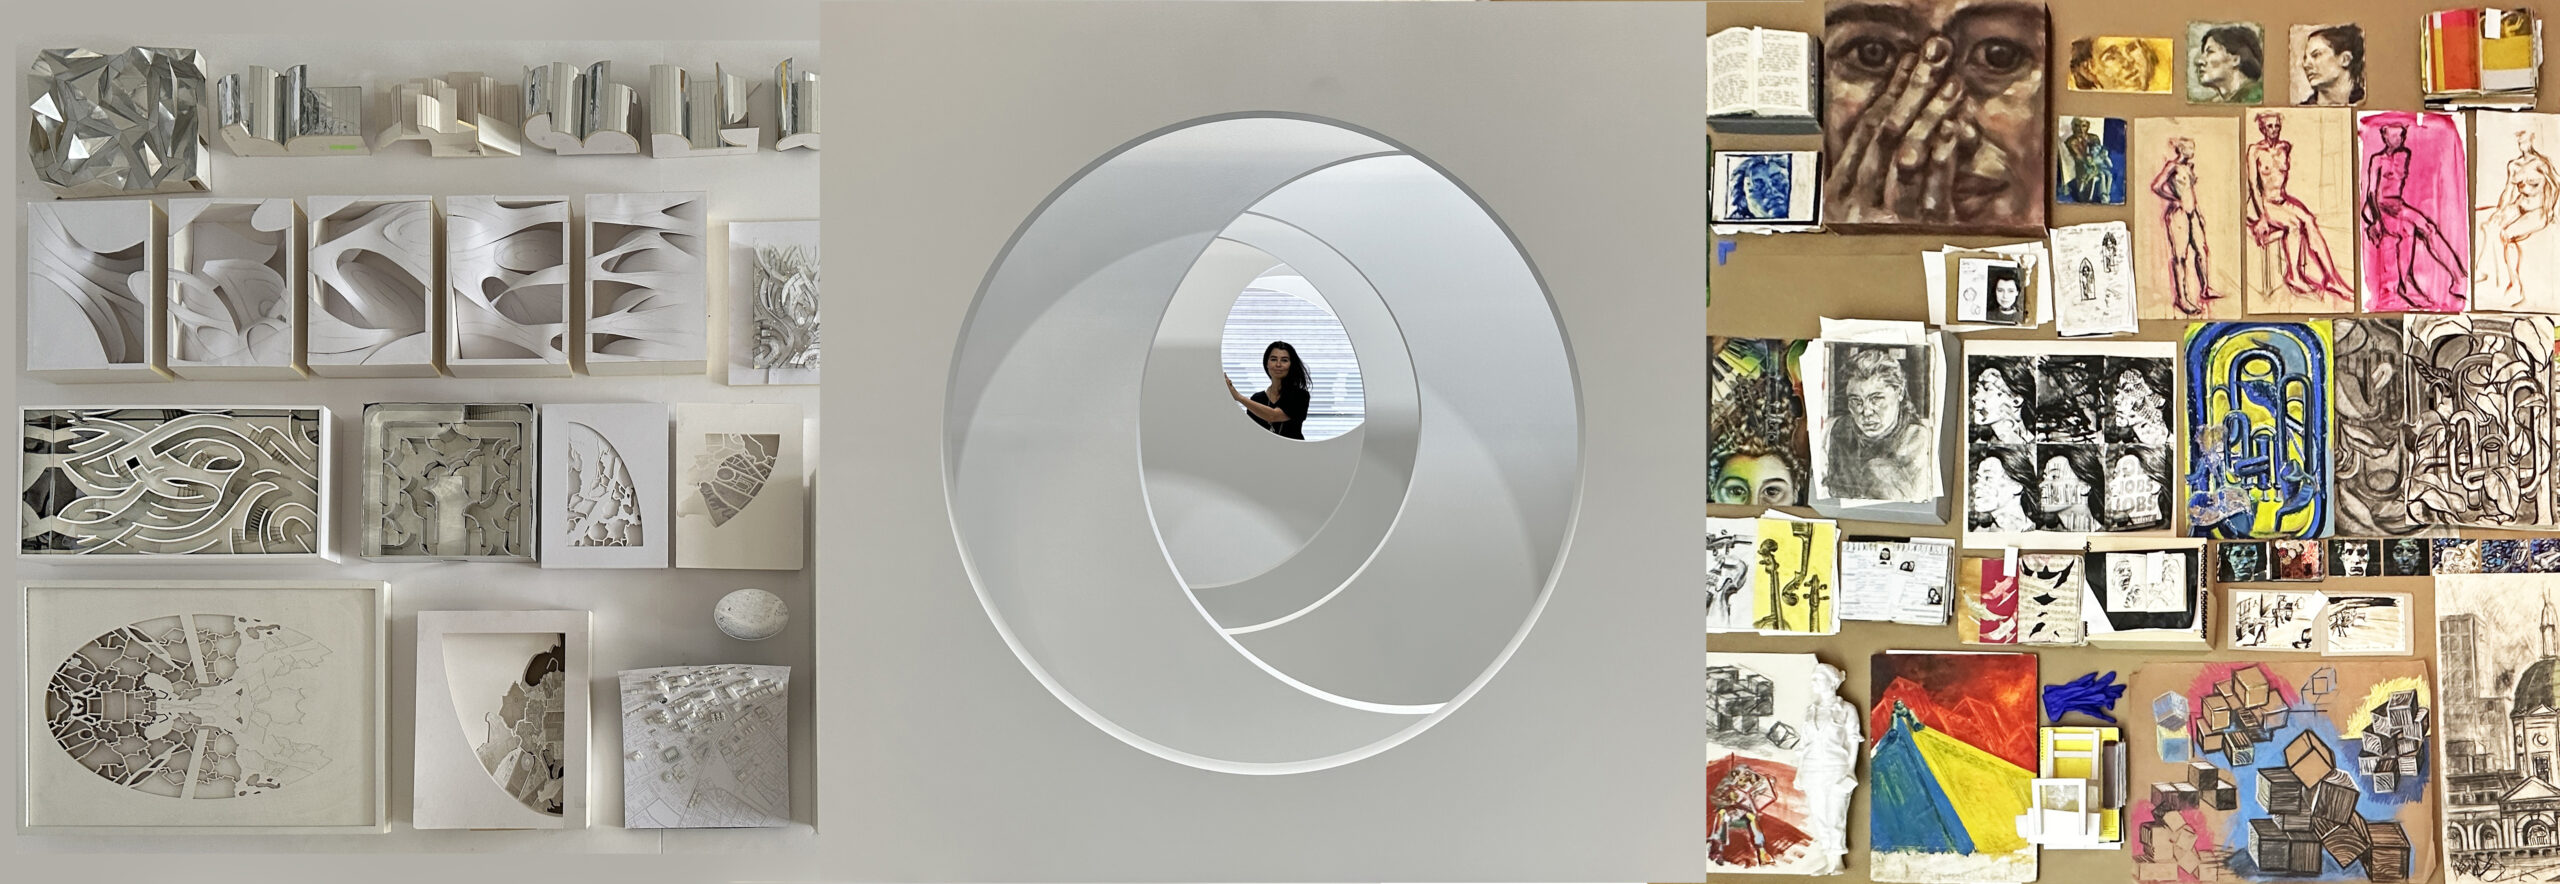 In the center is a large circle cut into a white wall. Es Devlin, a woman with dark hair, stands in the distance beyond this cutout, behind several overlapping crescent-moon-shaped layers of white. On the left, several curving 3D models and abstract drawings are arranged in a neat white and gray display. On the right is a vibrant, colorful collage of sketches and paintings.